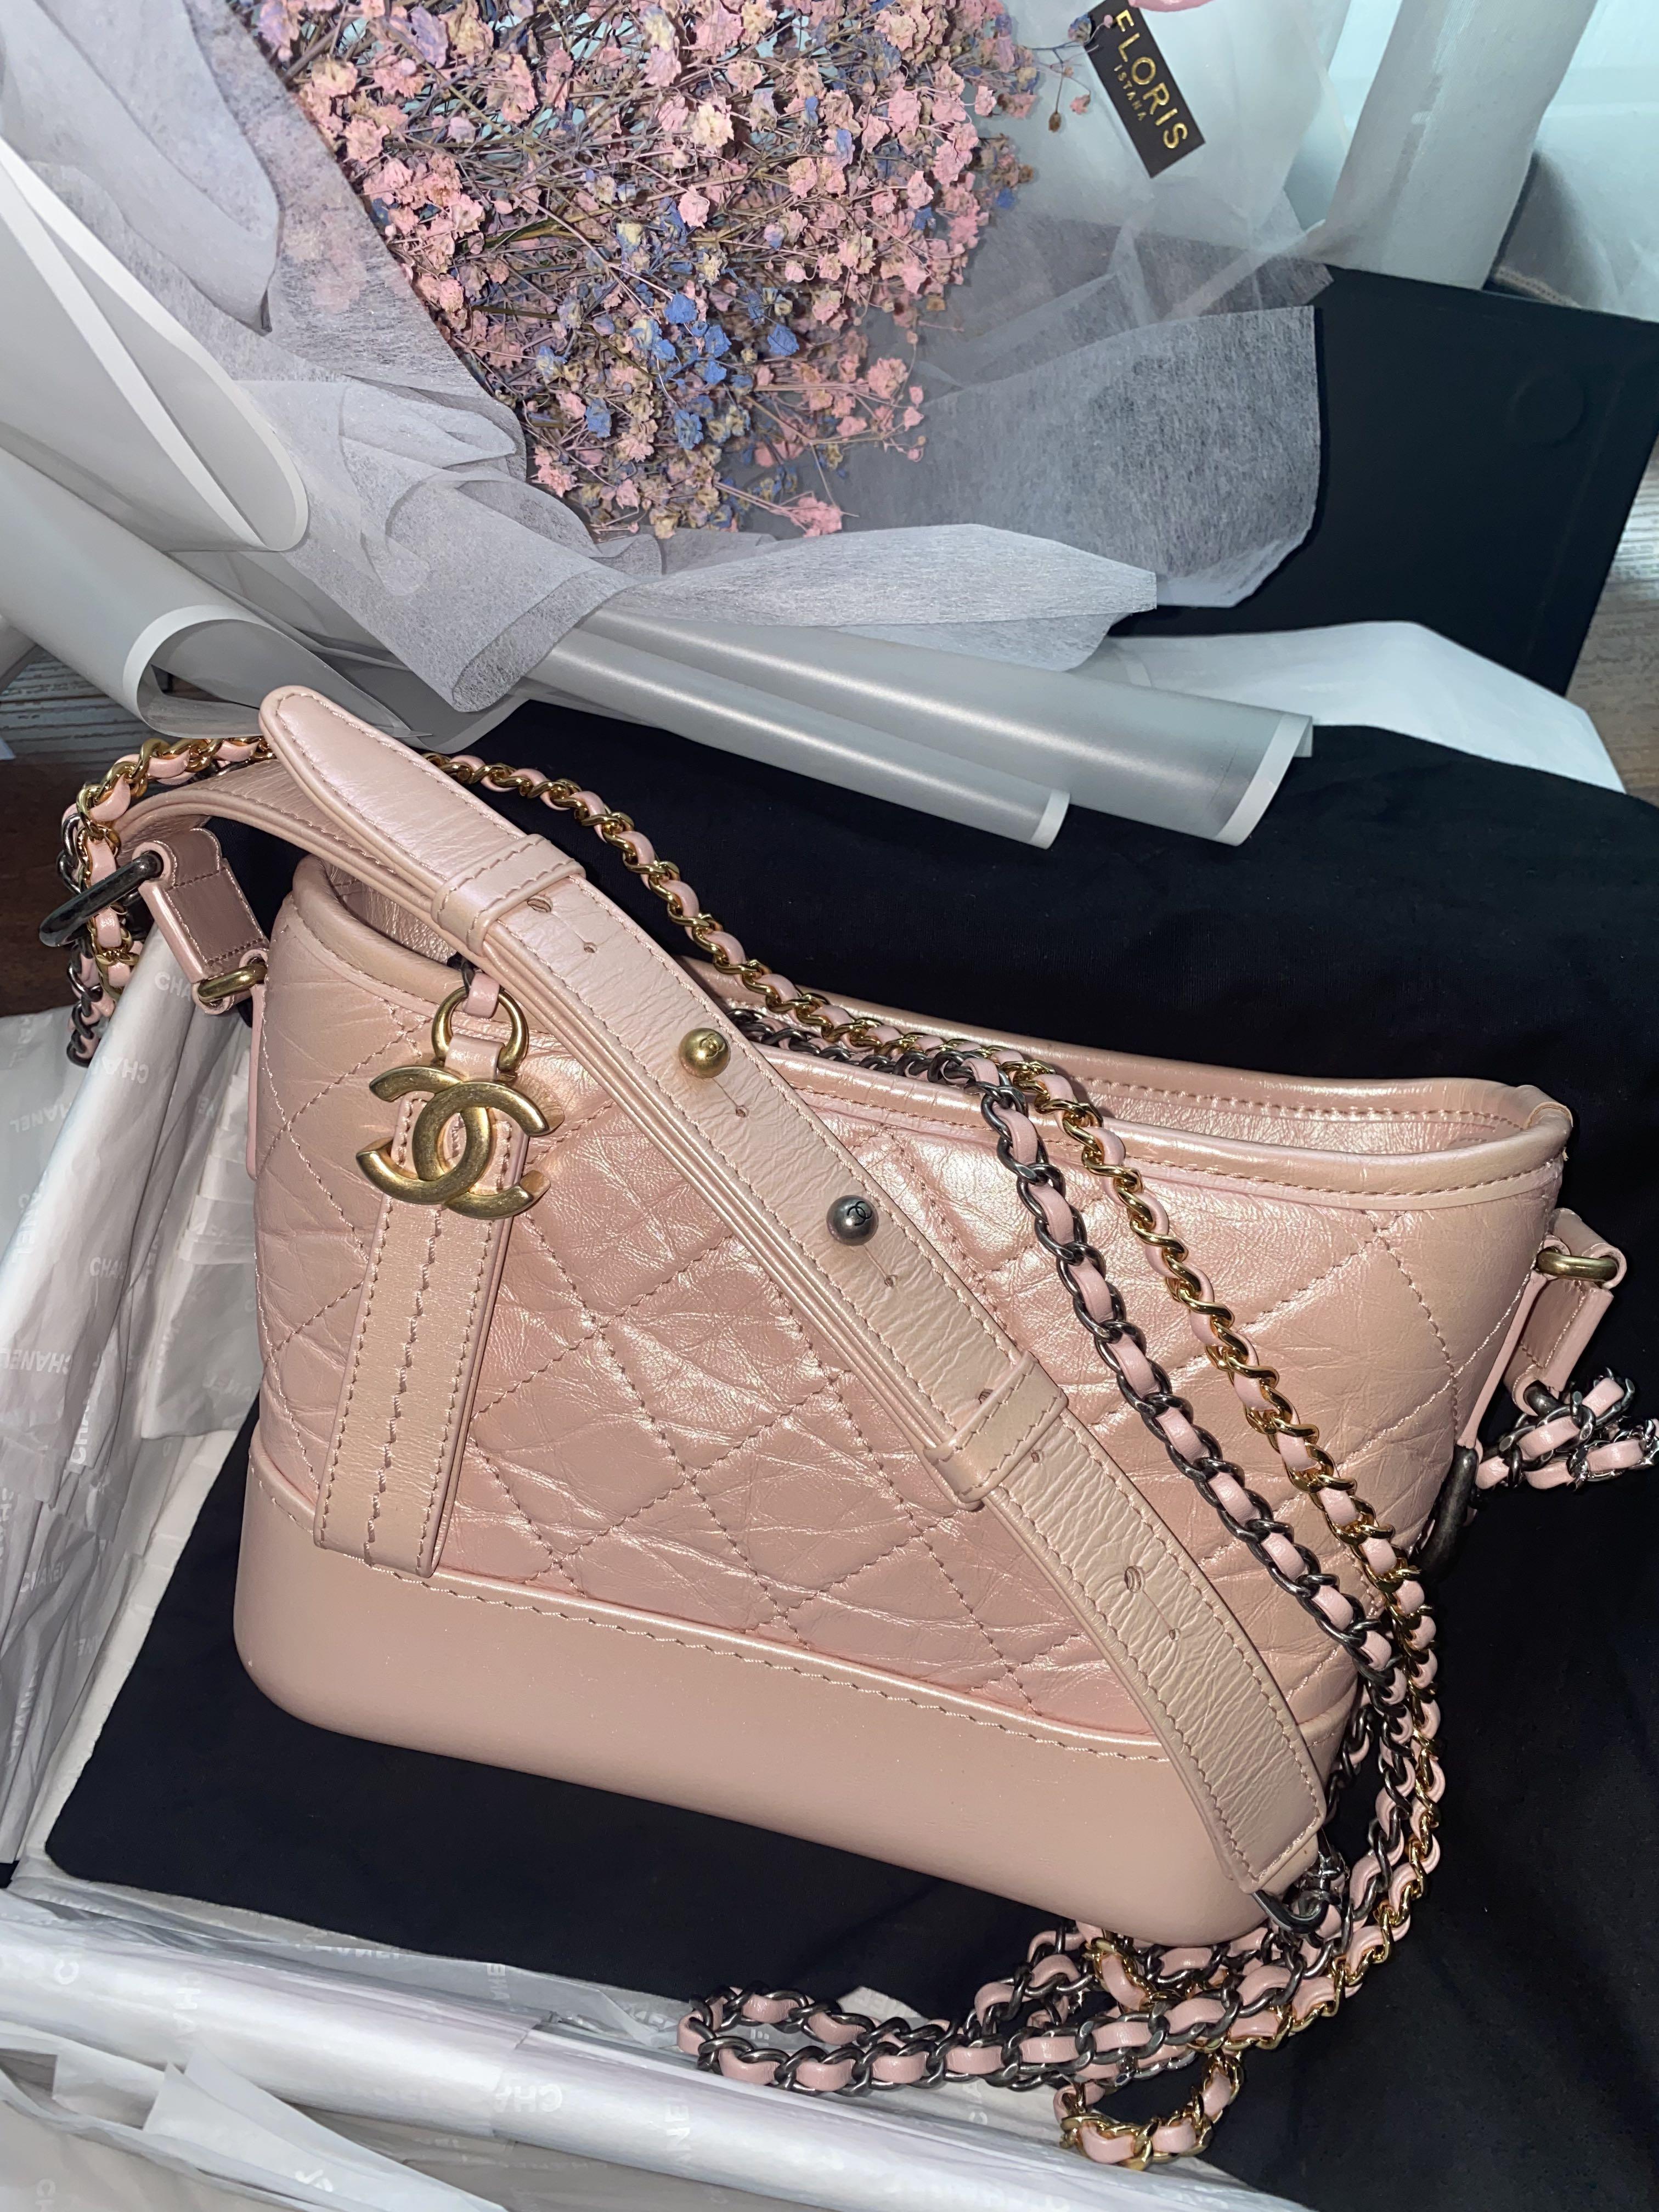 Authentic Chanel Iridescent Pink Small Gabrielle Hobo Bag Gold